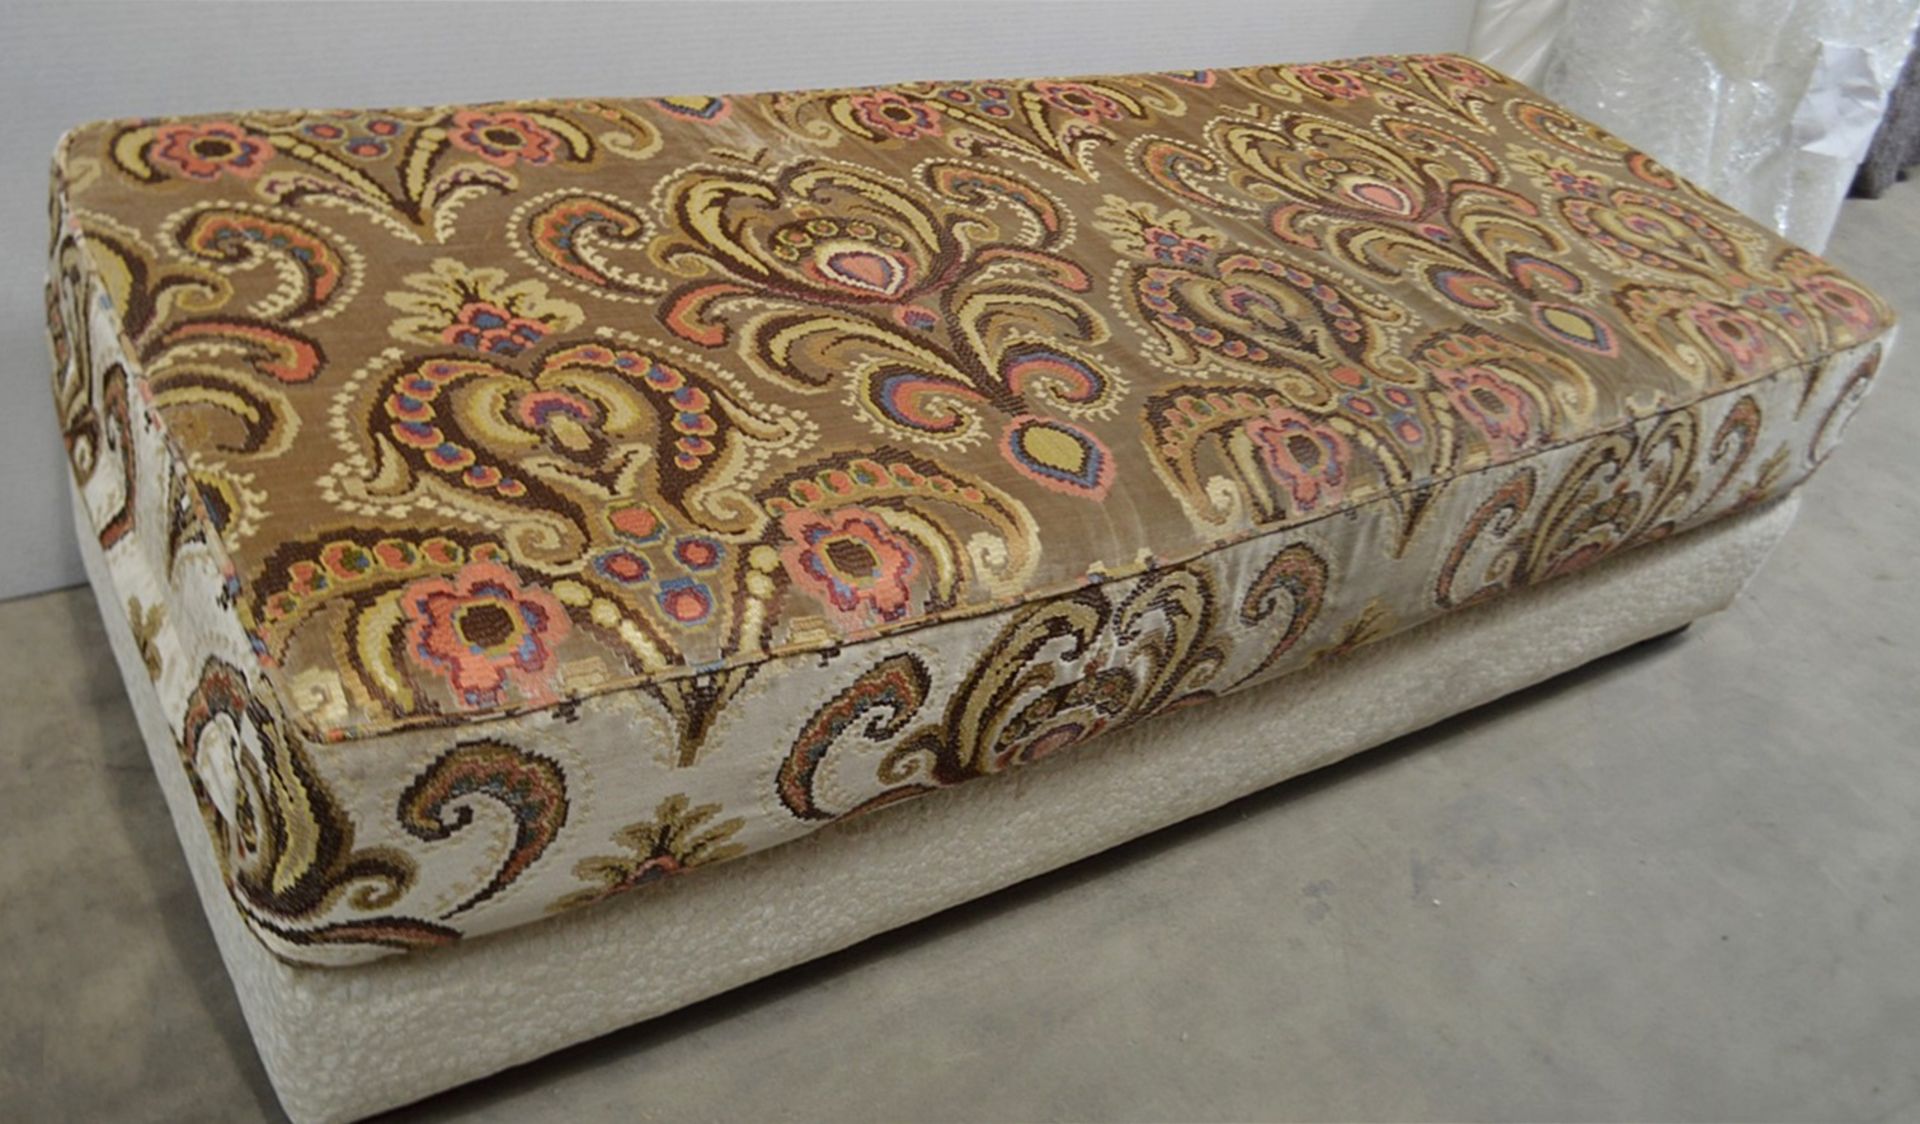 1 x Rectangular 1.7 Metre Moroccan-style Seating Bench With Matching Footstool And 5 x Scatter - Image 6 of 7